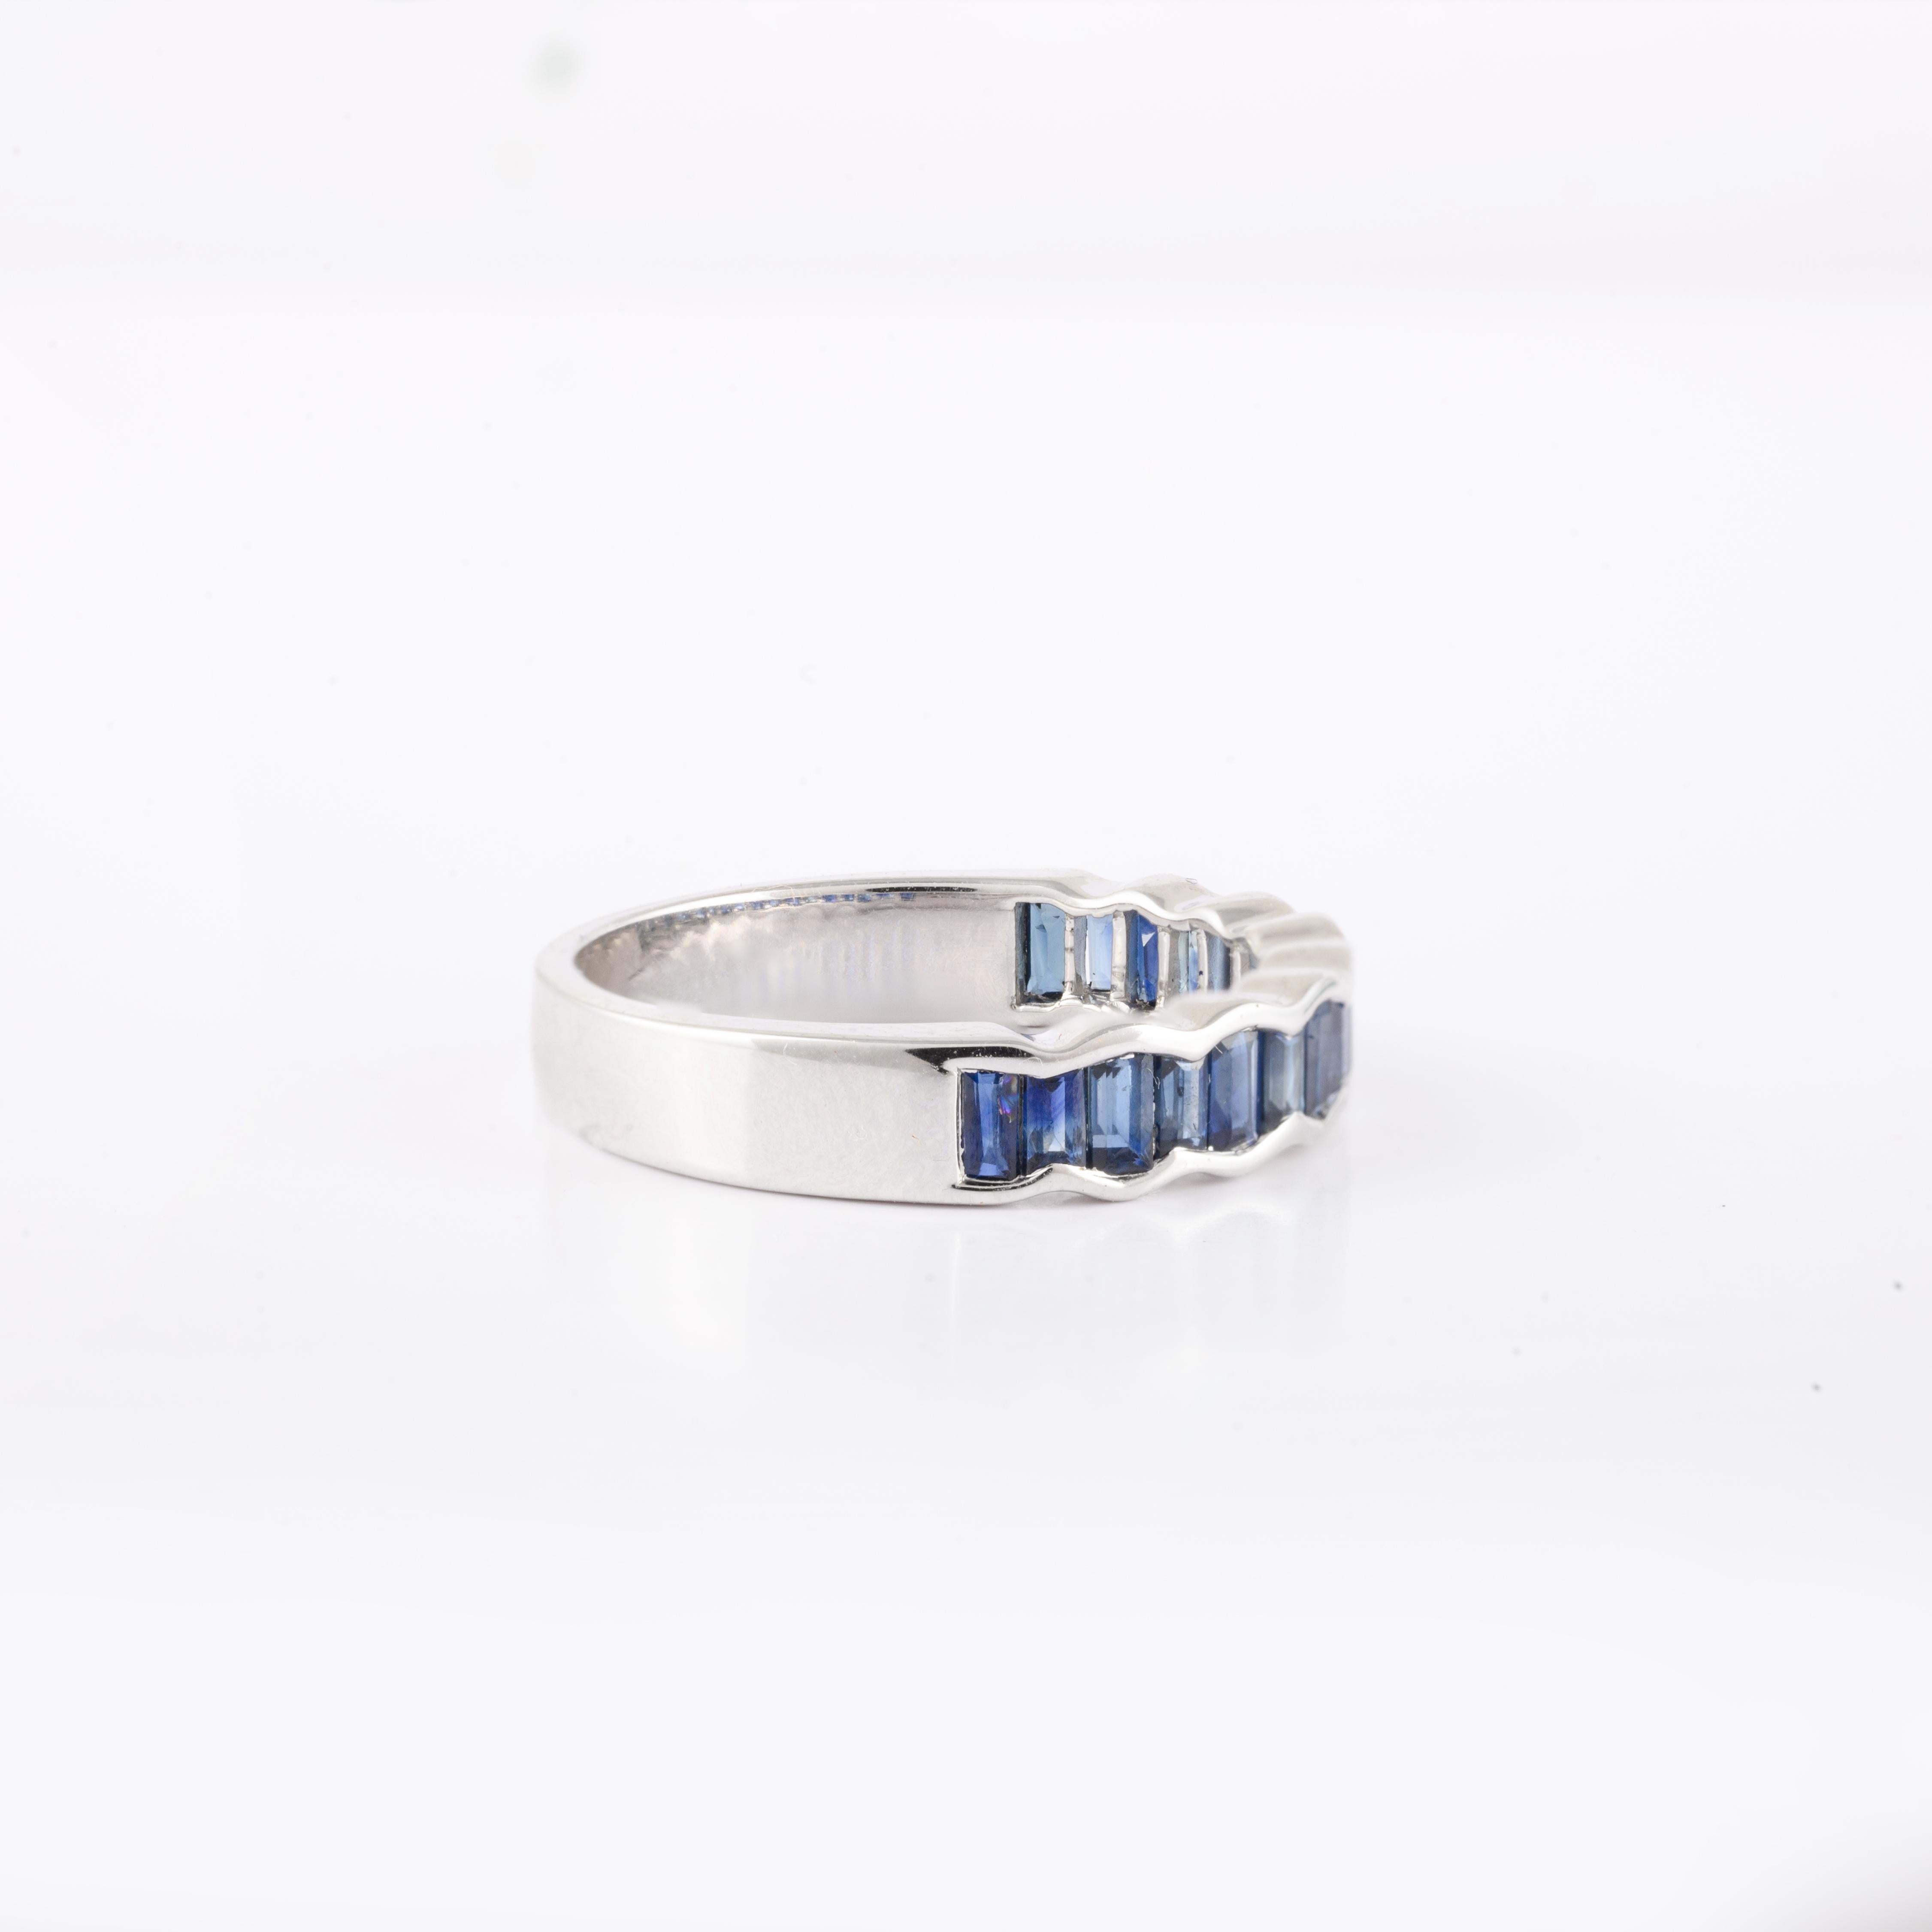 For Sale:  Elegant Stackable Blue Sapphire Gemstone Band Ring in 18k Solid White Gold 4